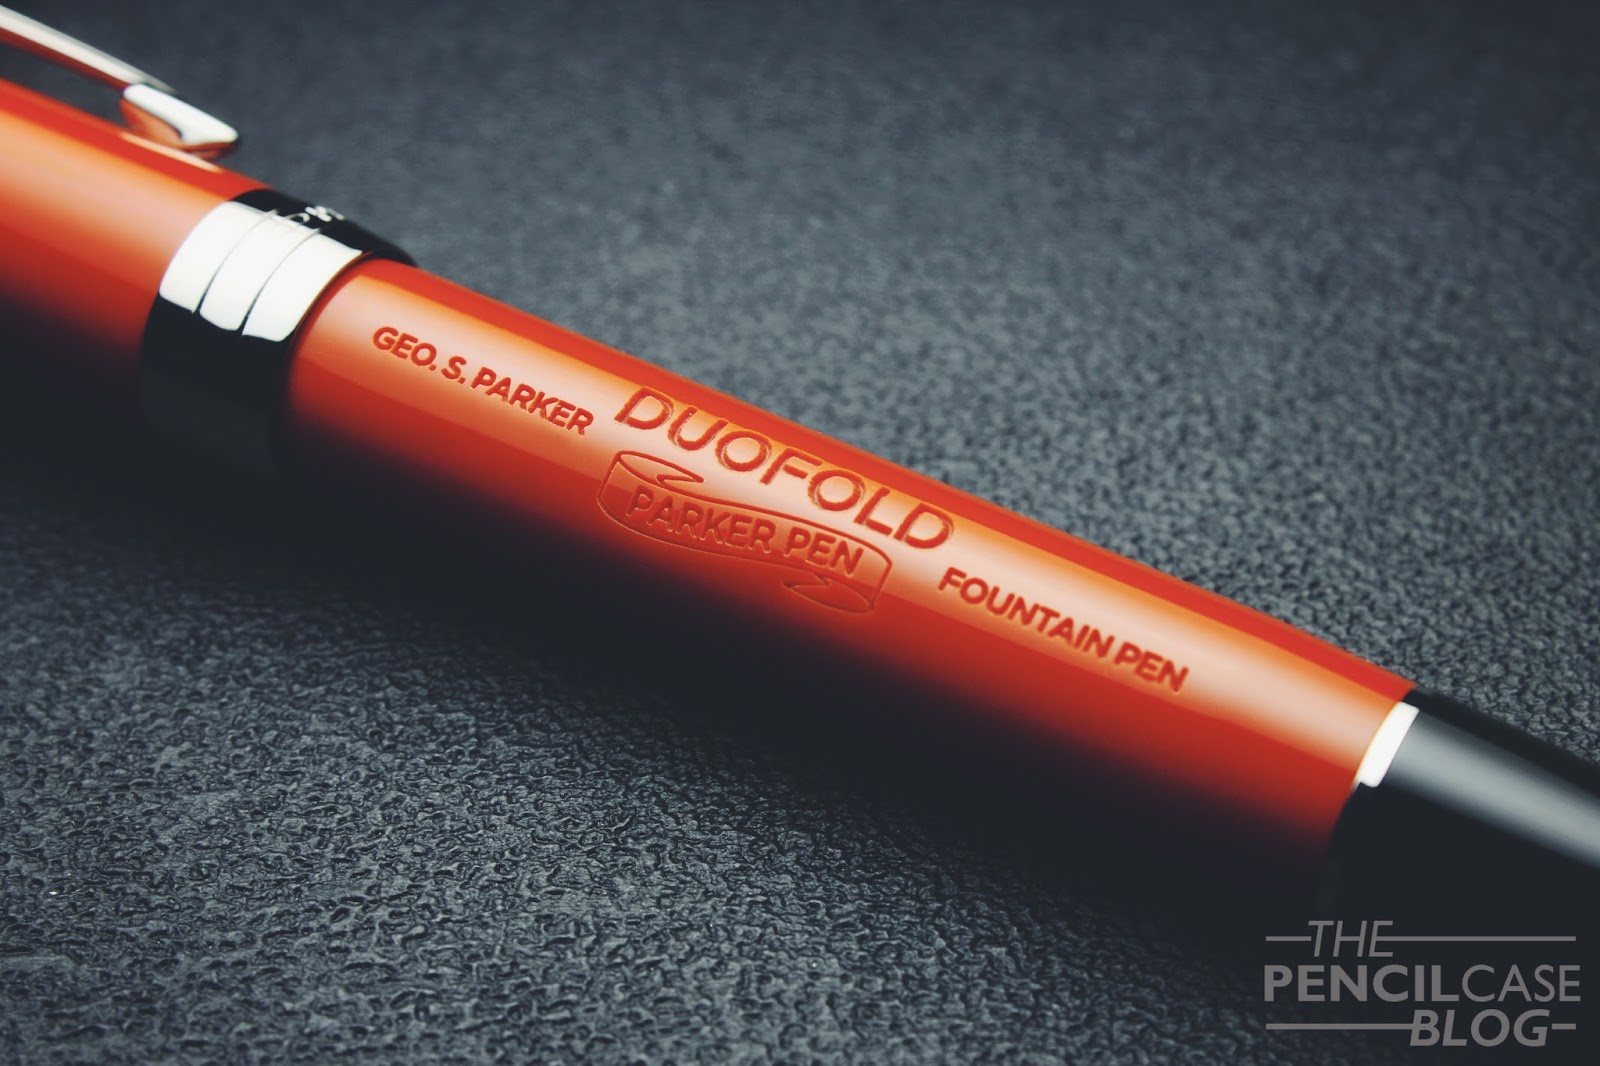 Anoi Disco Turbine PARKER DUOFOLD CENTENNIAL BIG RED FOUNTAIN PEN REVIEW | The Pencilcase Blog  | Fountain pen, Pencil, Ink and Paper reviews